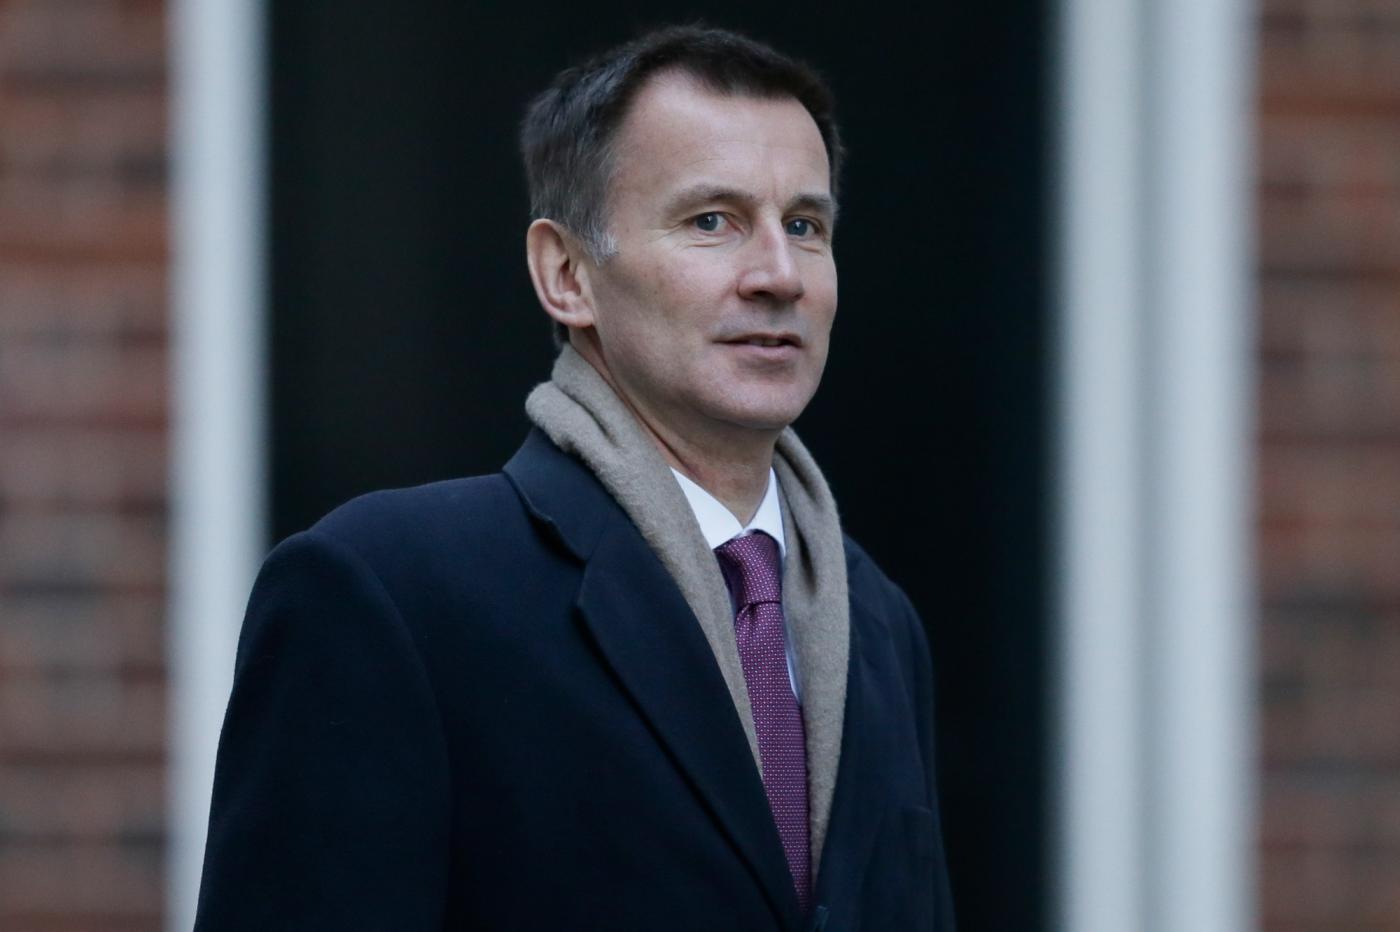 LONDON, Jan. 9, 2019 (Xinhua) -- British Foreign Secretary Jeremy Hunt arrives for a cabinet meeting at 10 Downing Street in London, Britain on Jan. 8. 2019. British government confirmed Tuesday that a delayed parliamentary vote on the Brexit deal will take place on Jan. 15. (Xinhua/Tim Ireland/IANS) by . 